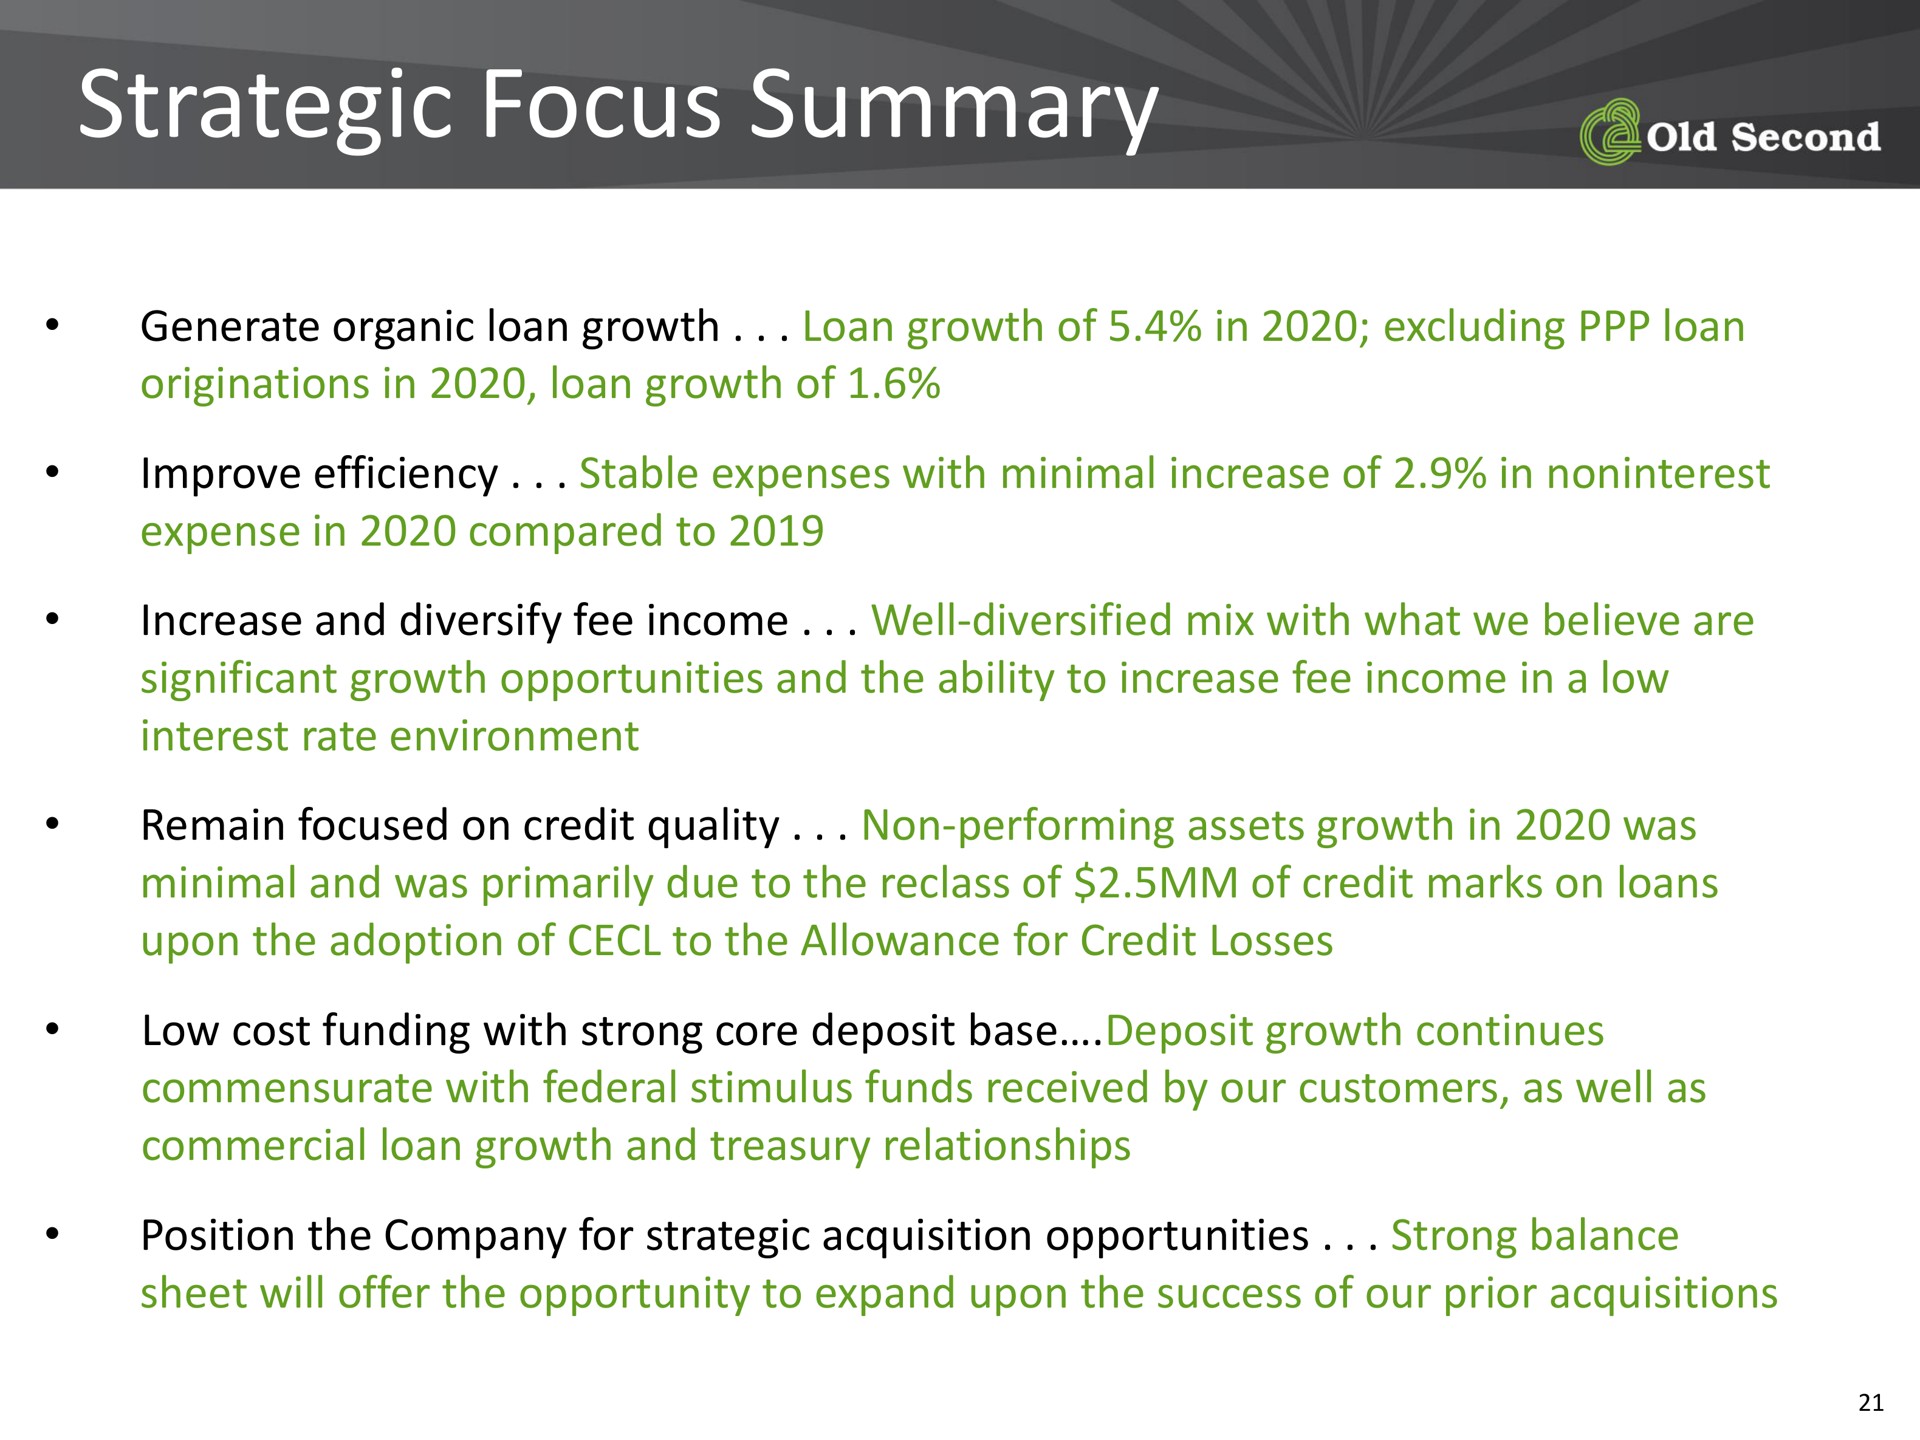 strategic focus summary it second | Old Second Bancorp